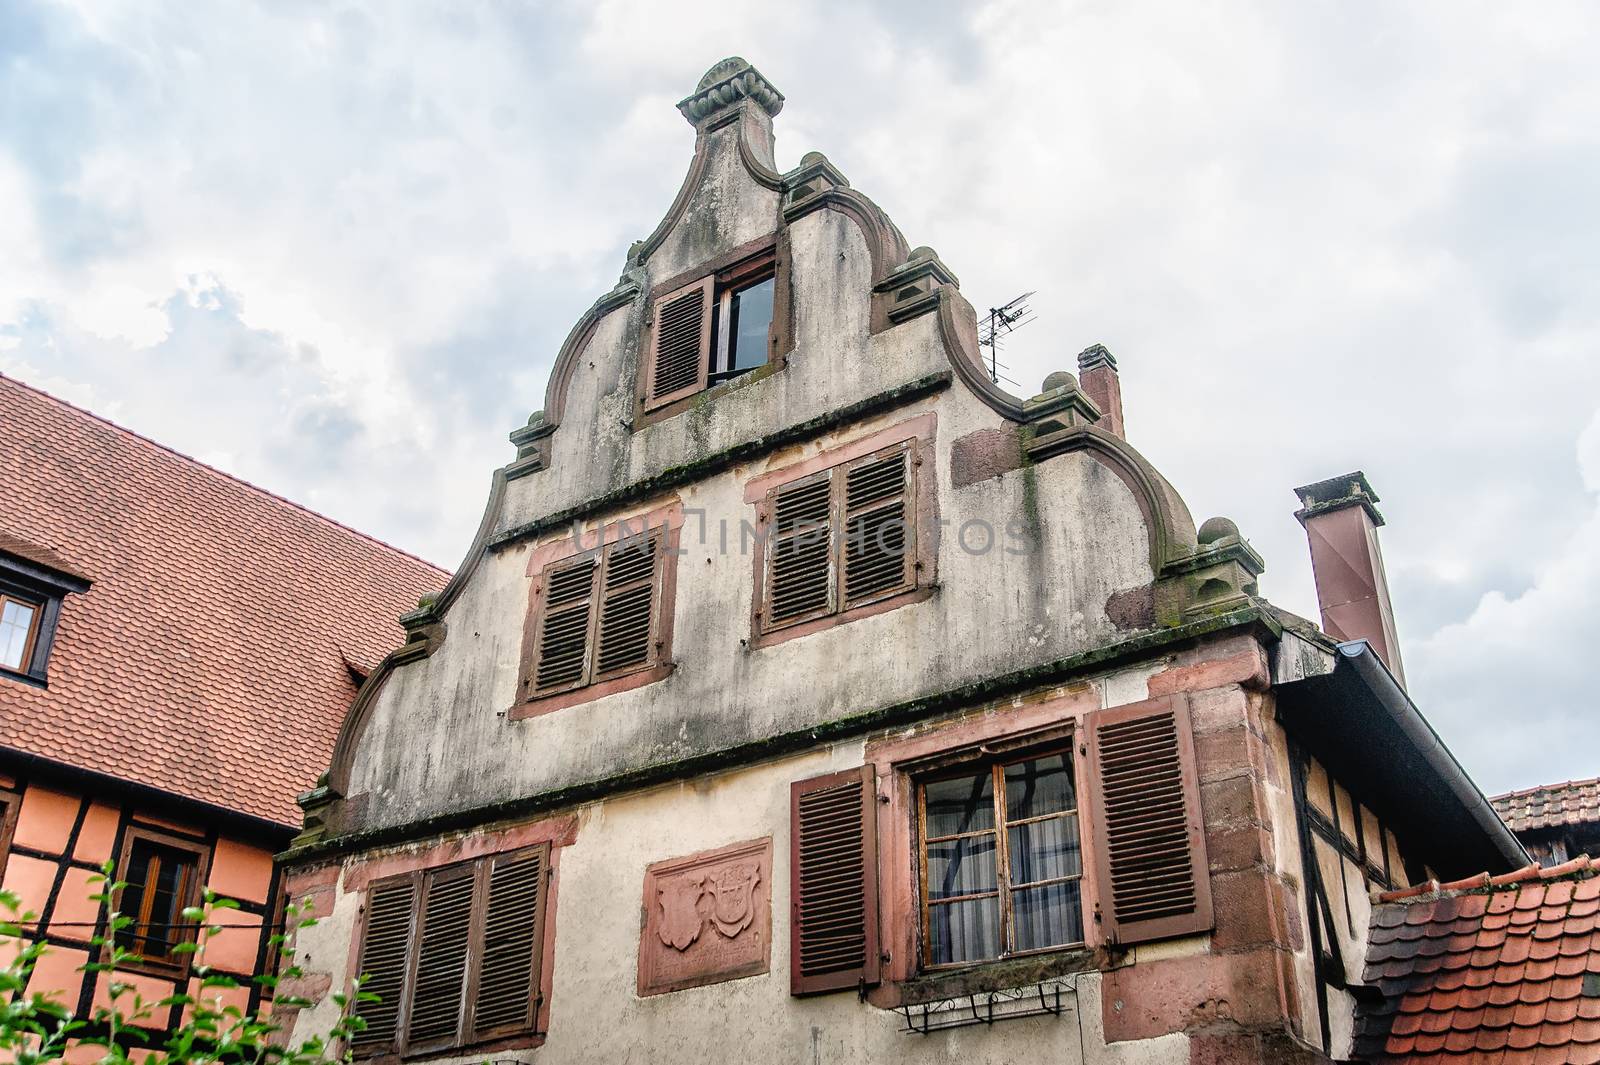 Top of a typical house in alsace, france